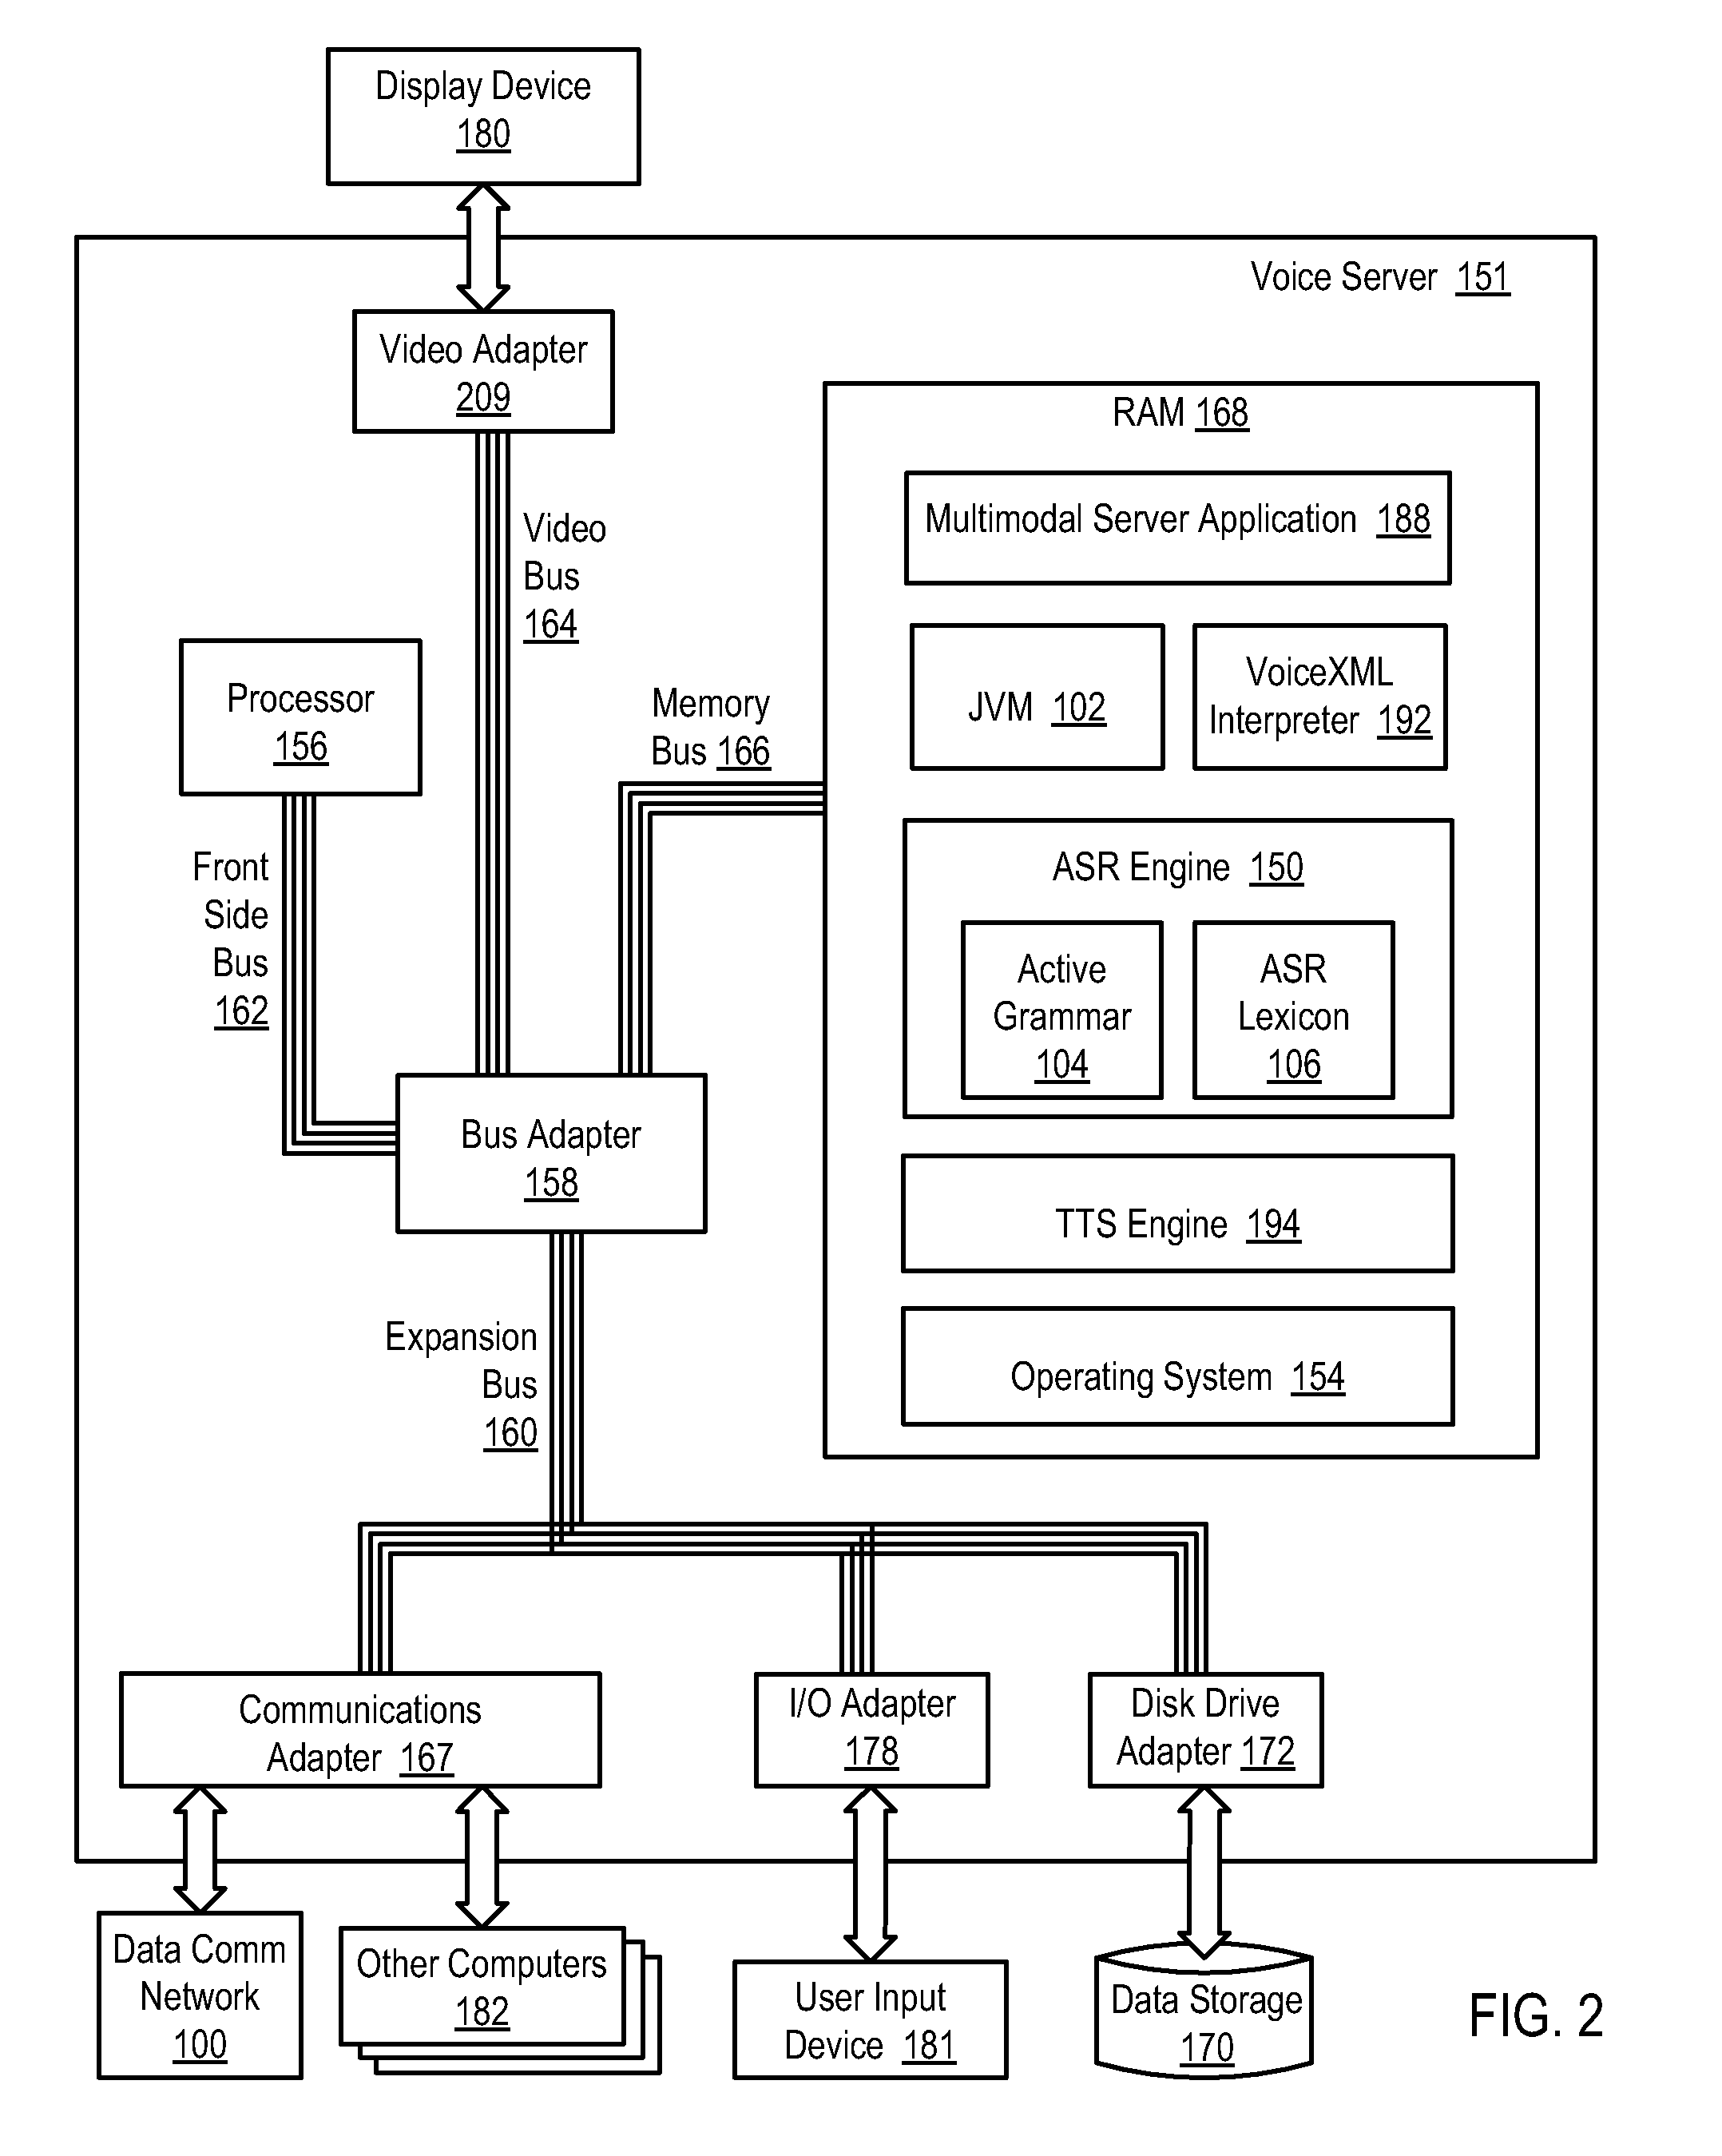 Oral modification of an asr lexicon of an asr engine